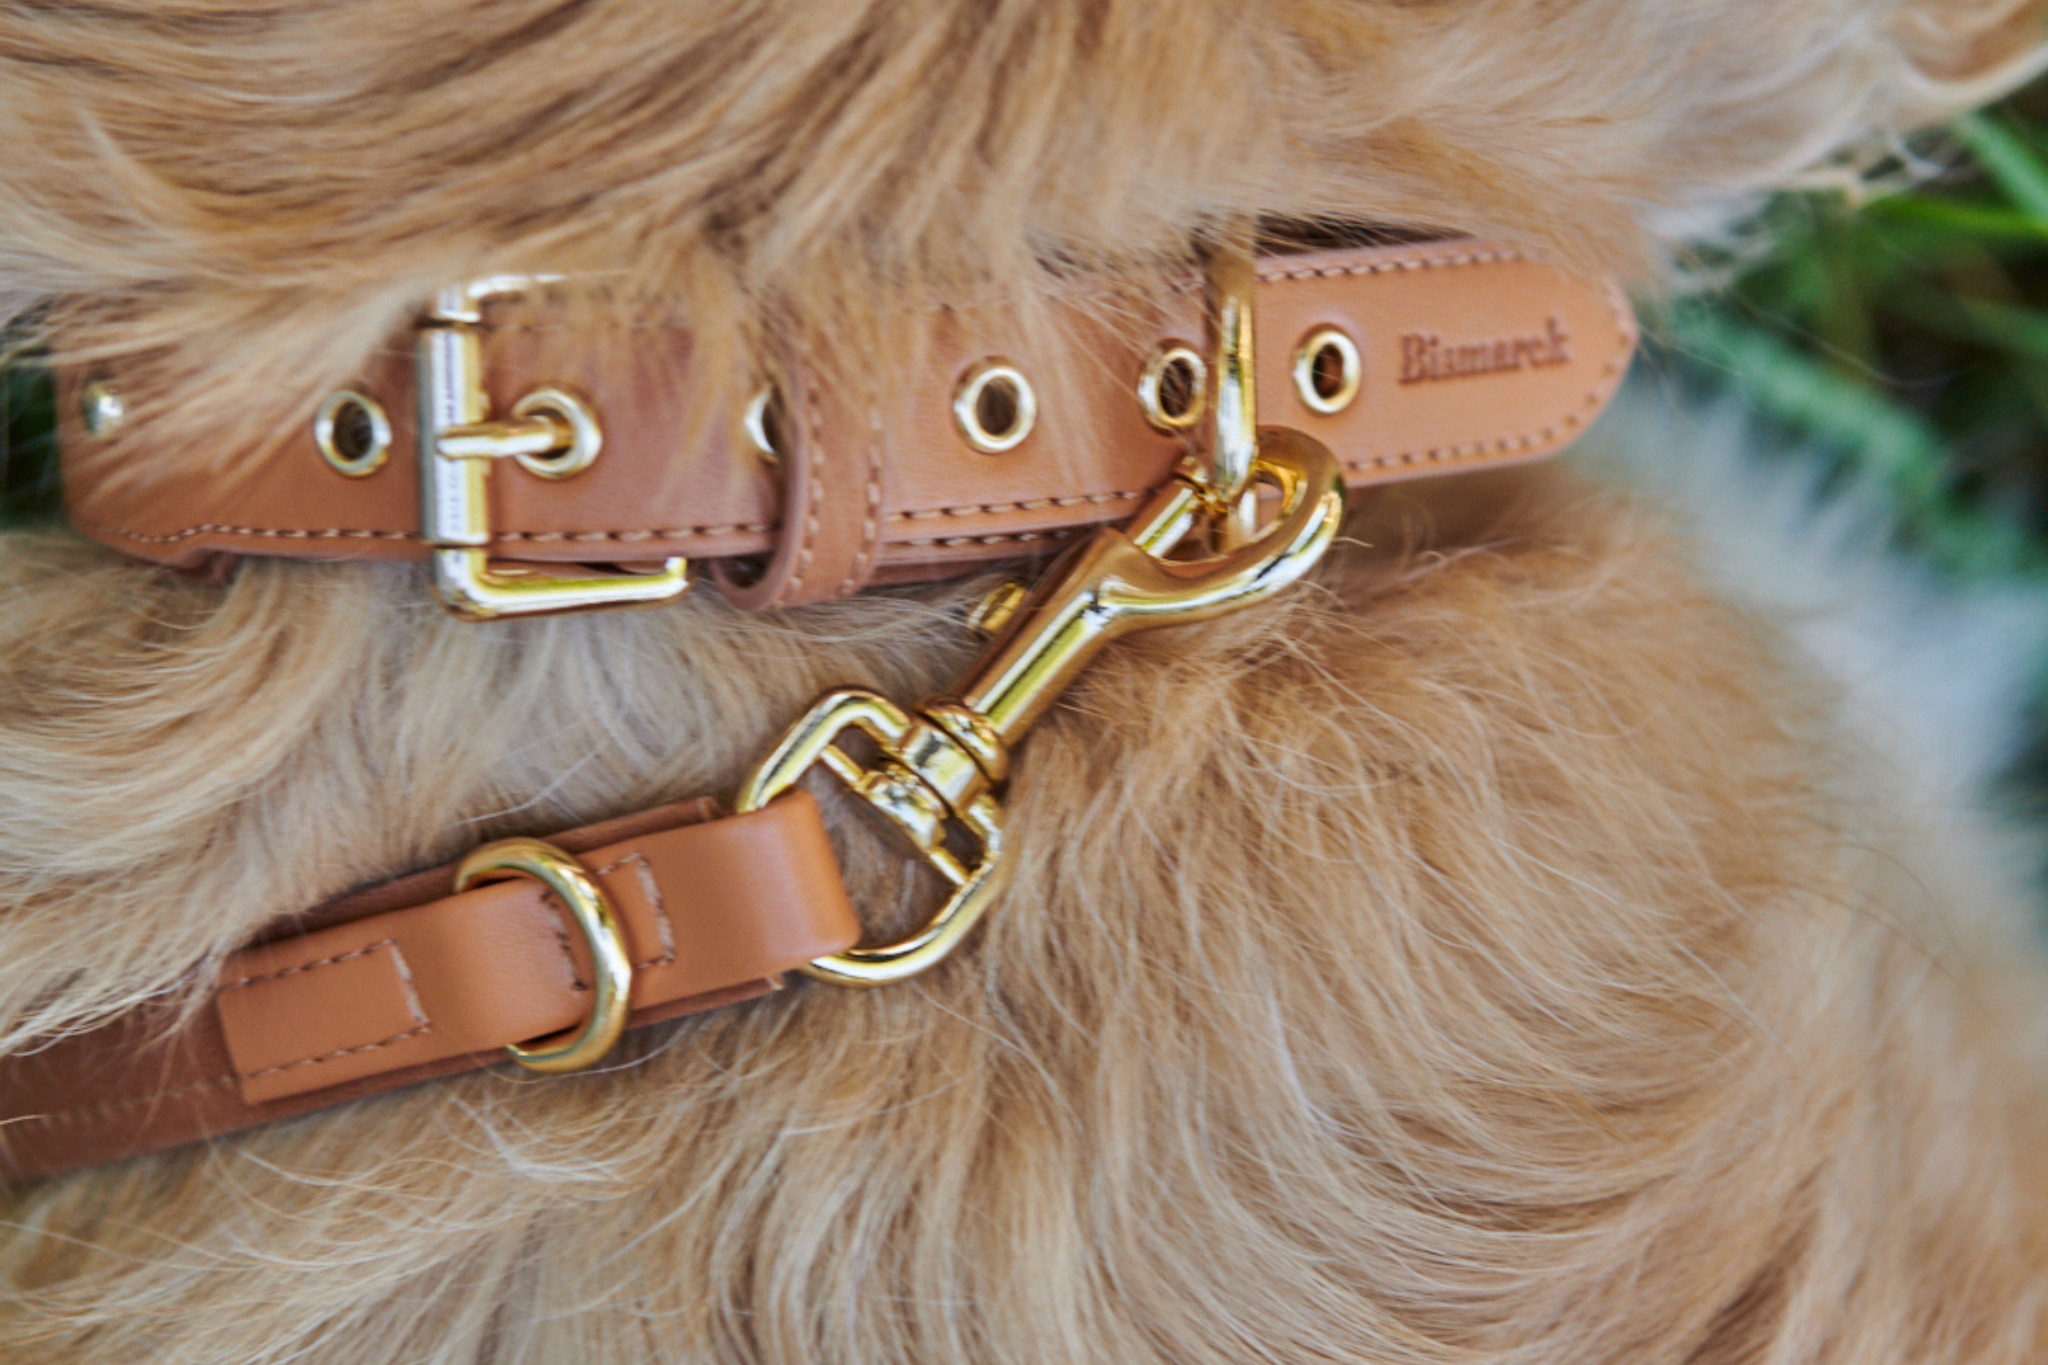 Apple Leather Leash in Camel